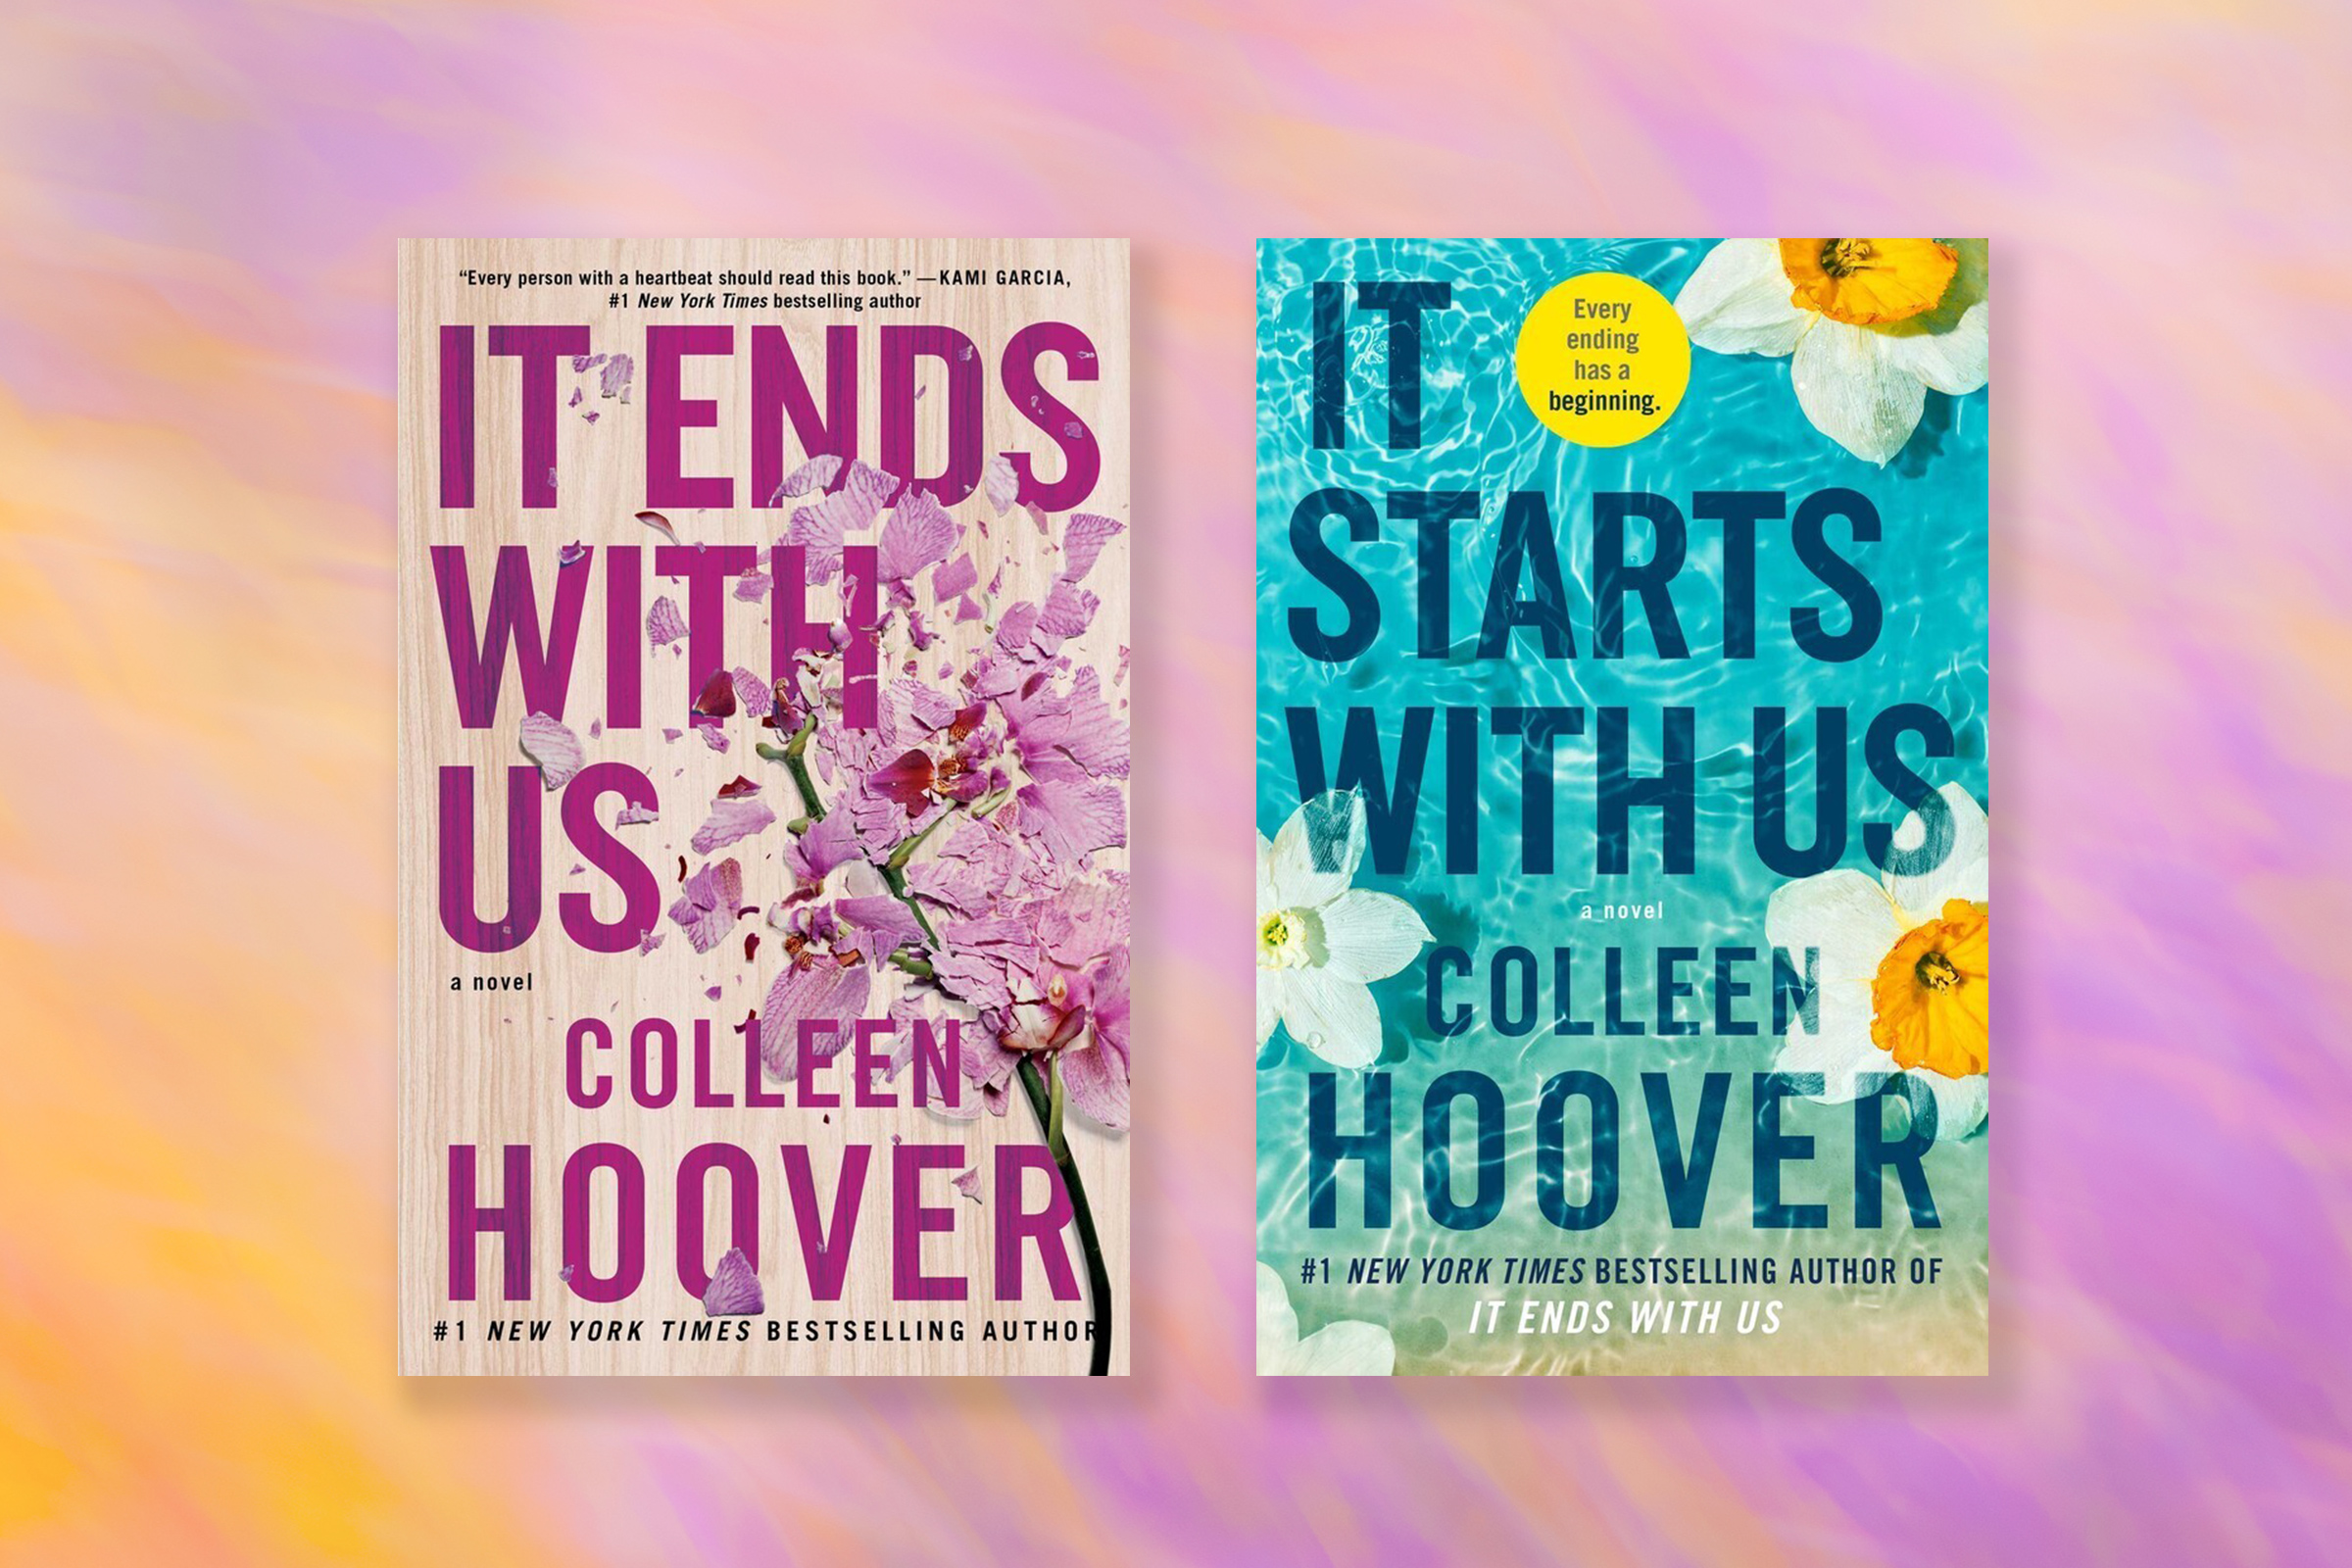 Colleen Hoover's latest book, “It Starts With Us,” is already leading